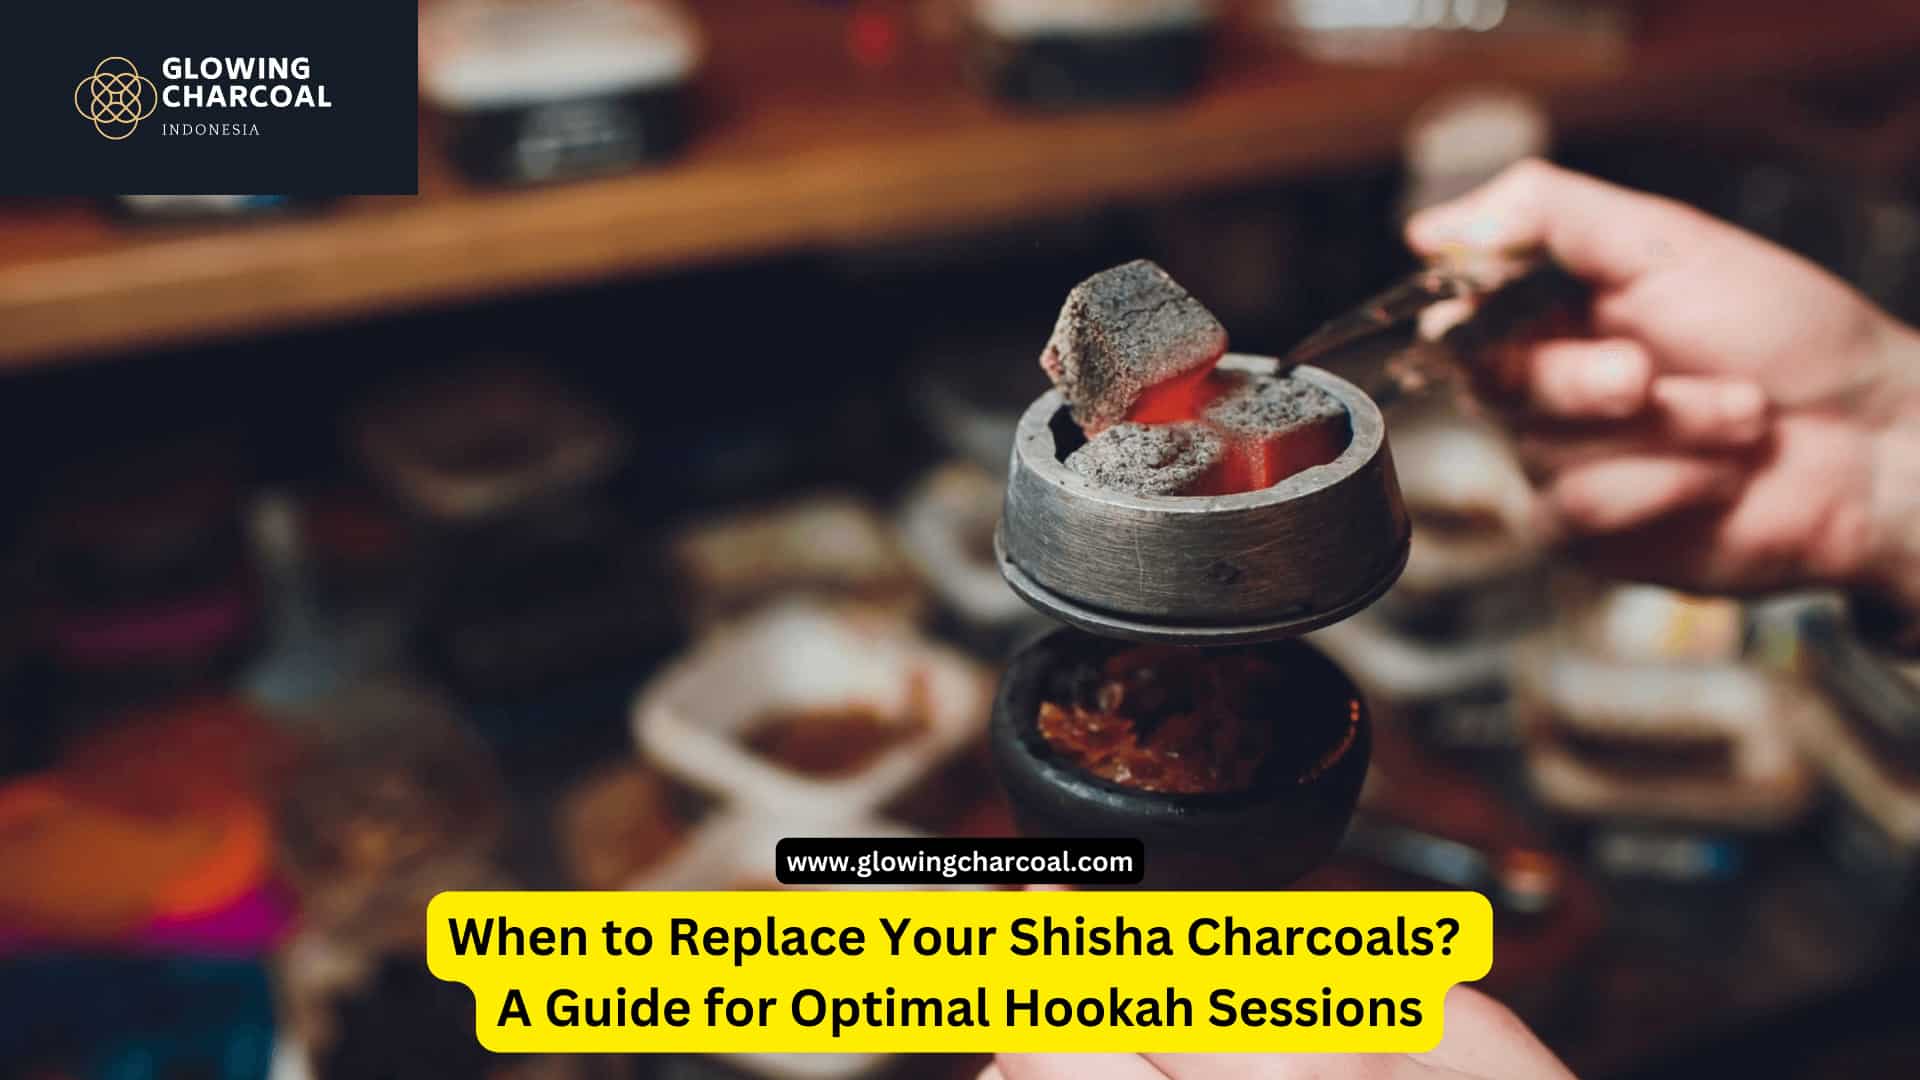 When to Replace Your Shisha Charcoals: A Guide for Optimal Hookah Sessions